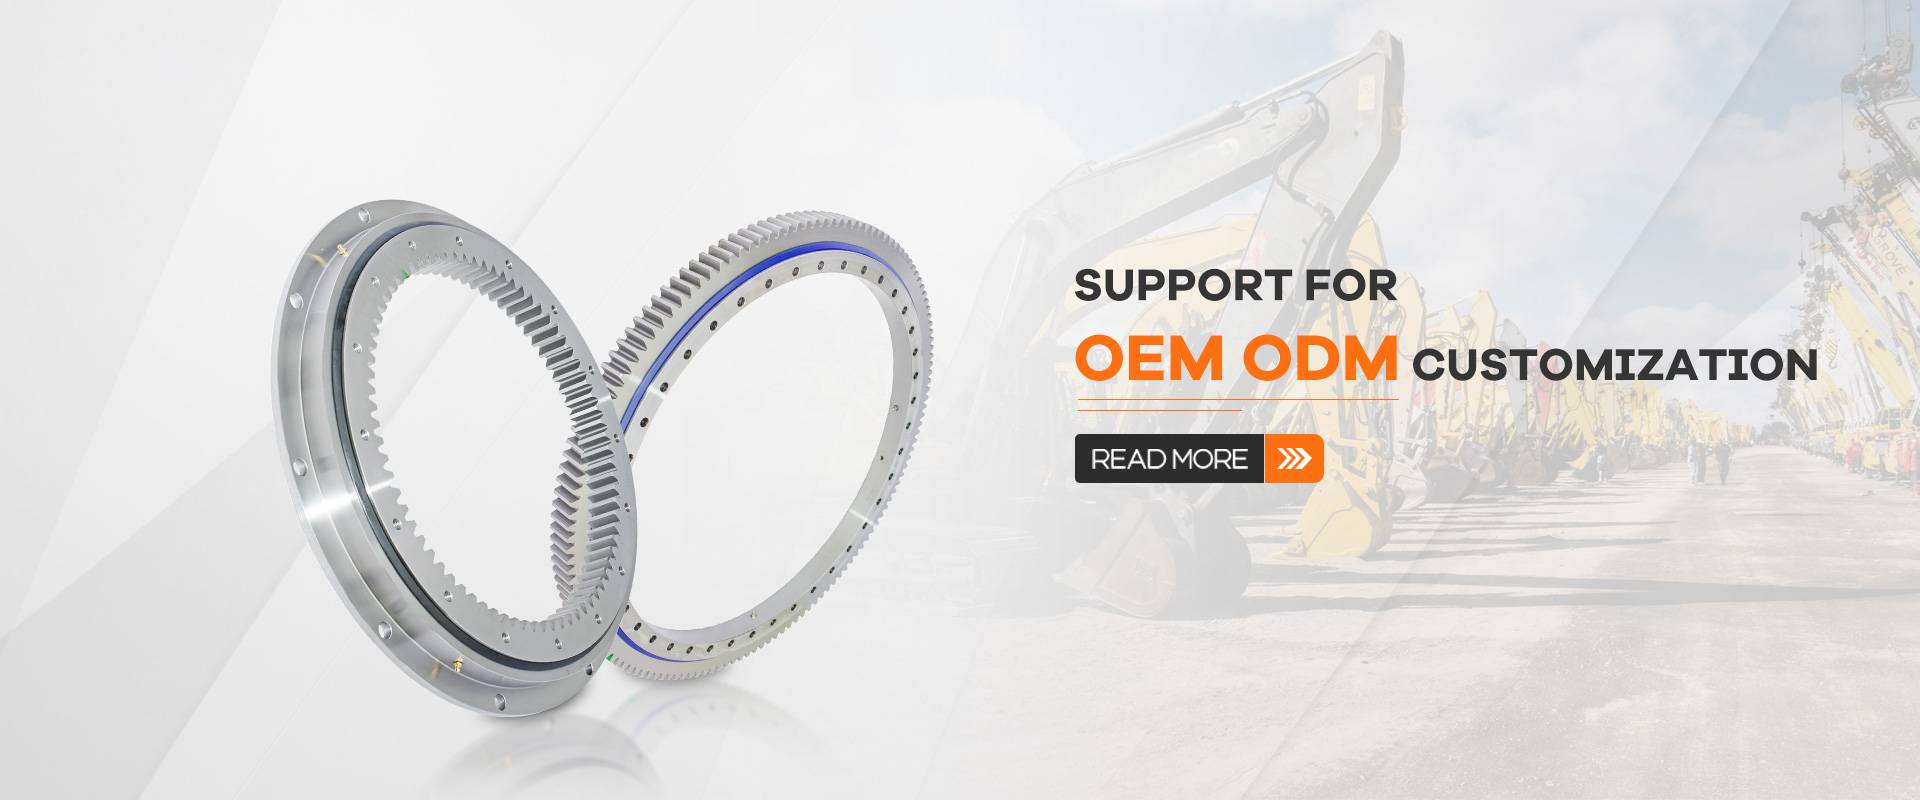 Support for OEM ODM customization